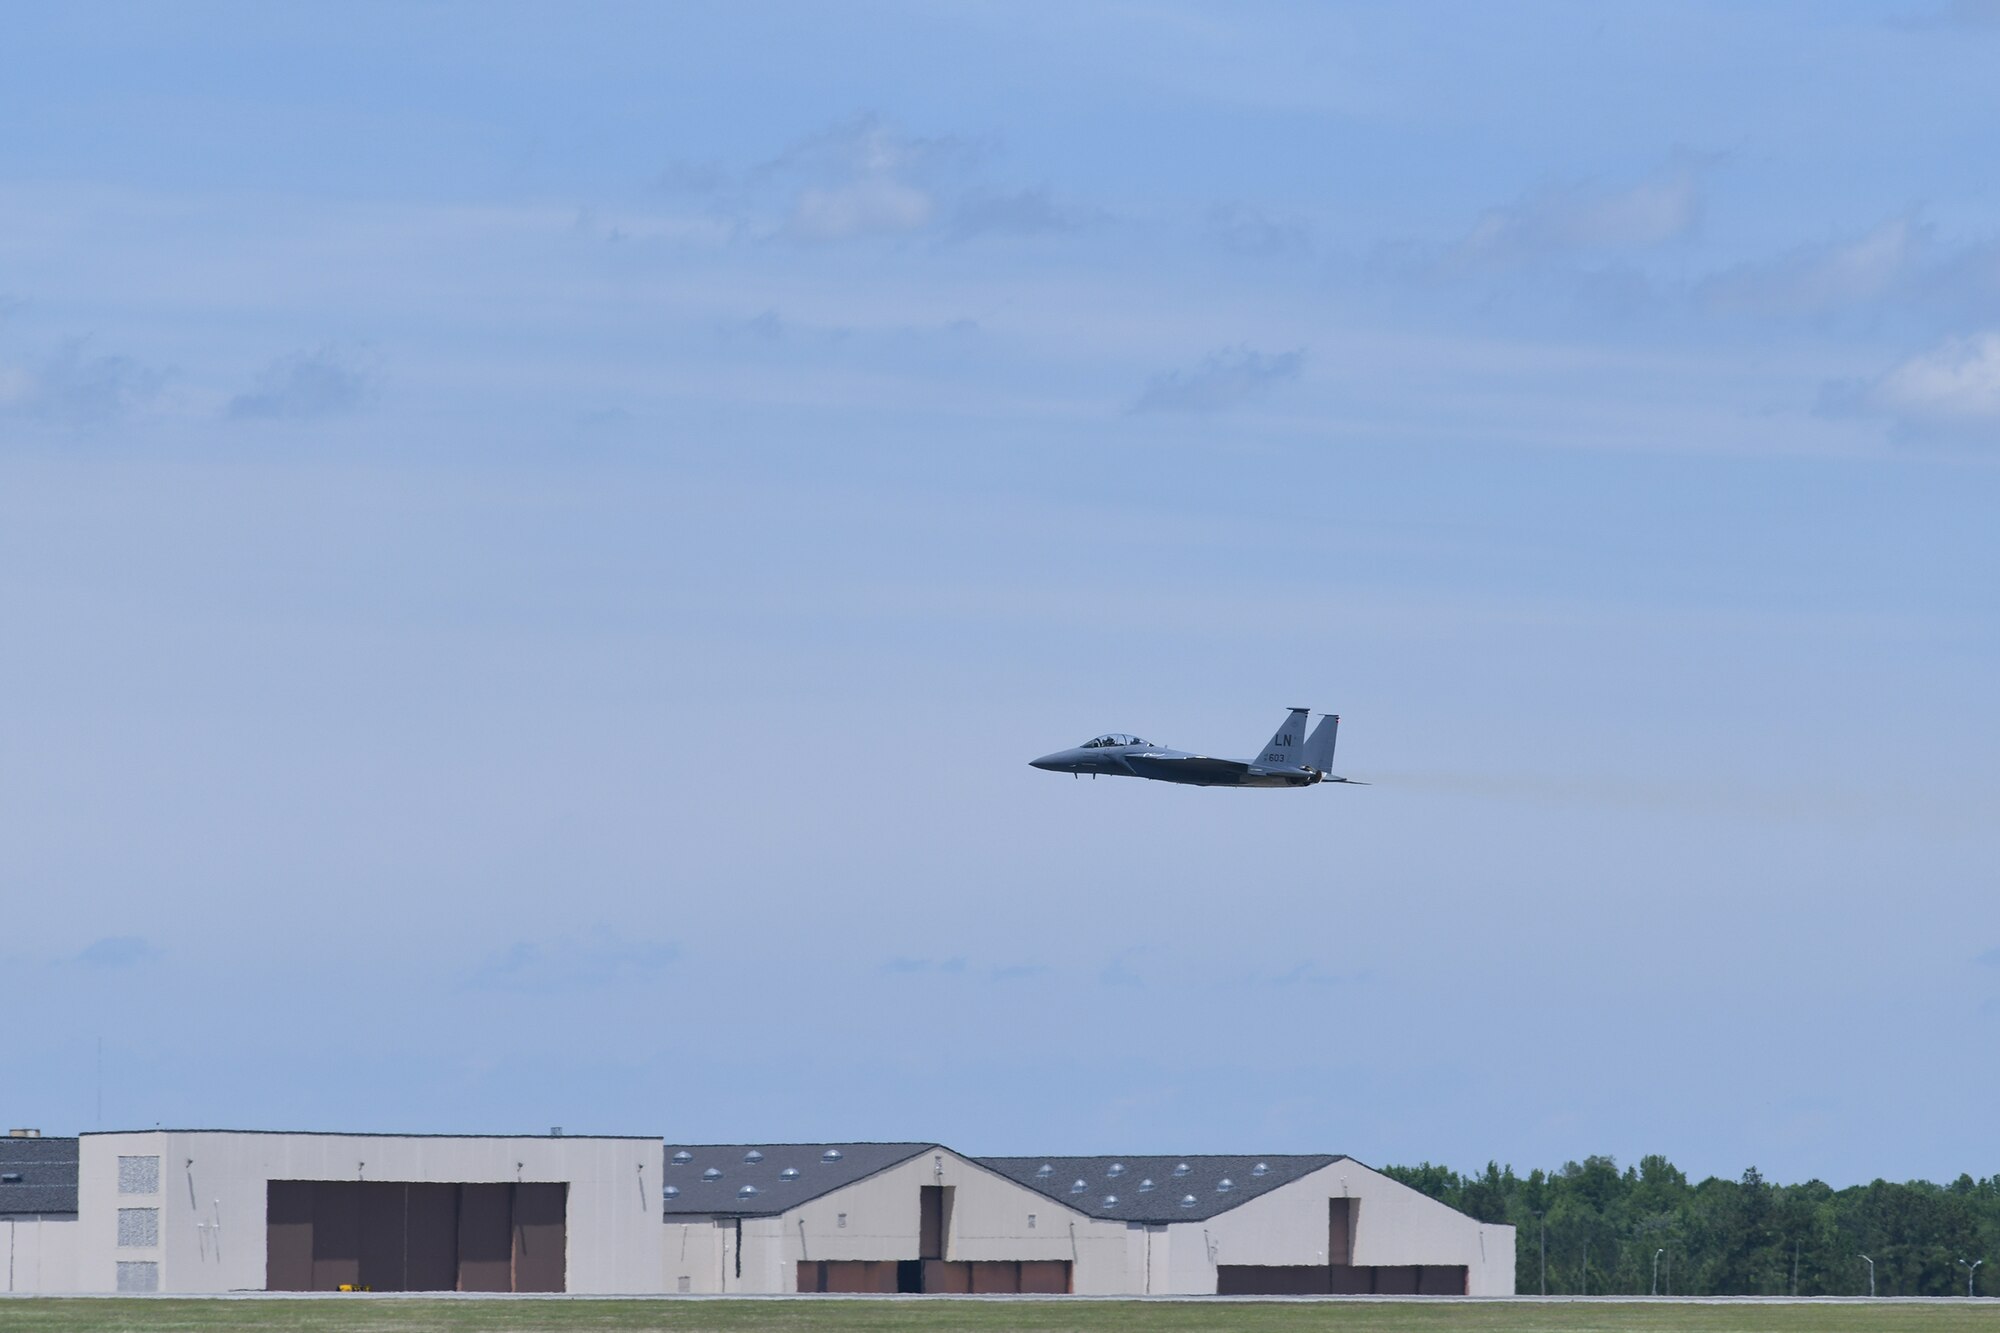 Photo shows an F-15 just above the tree line as it takes off.